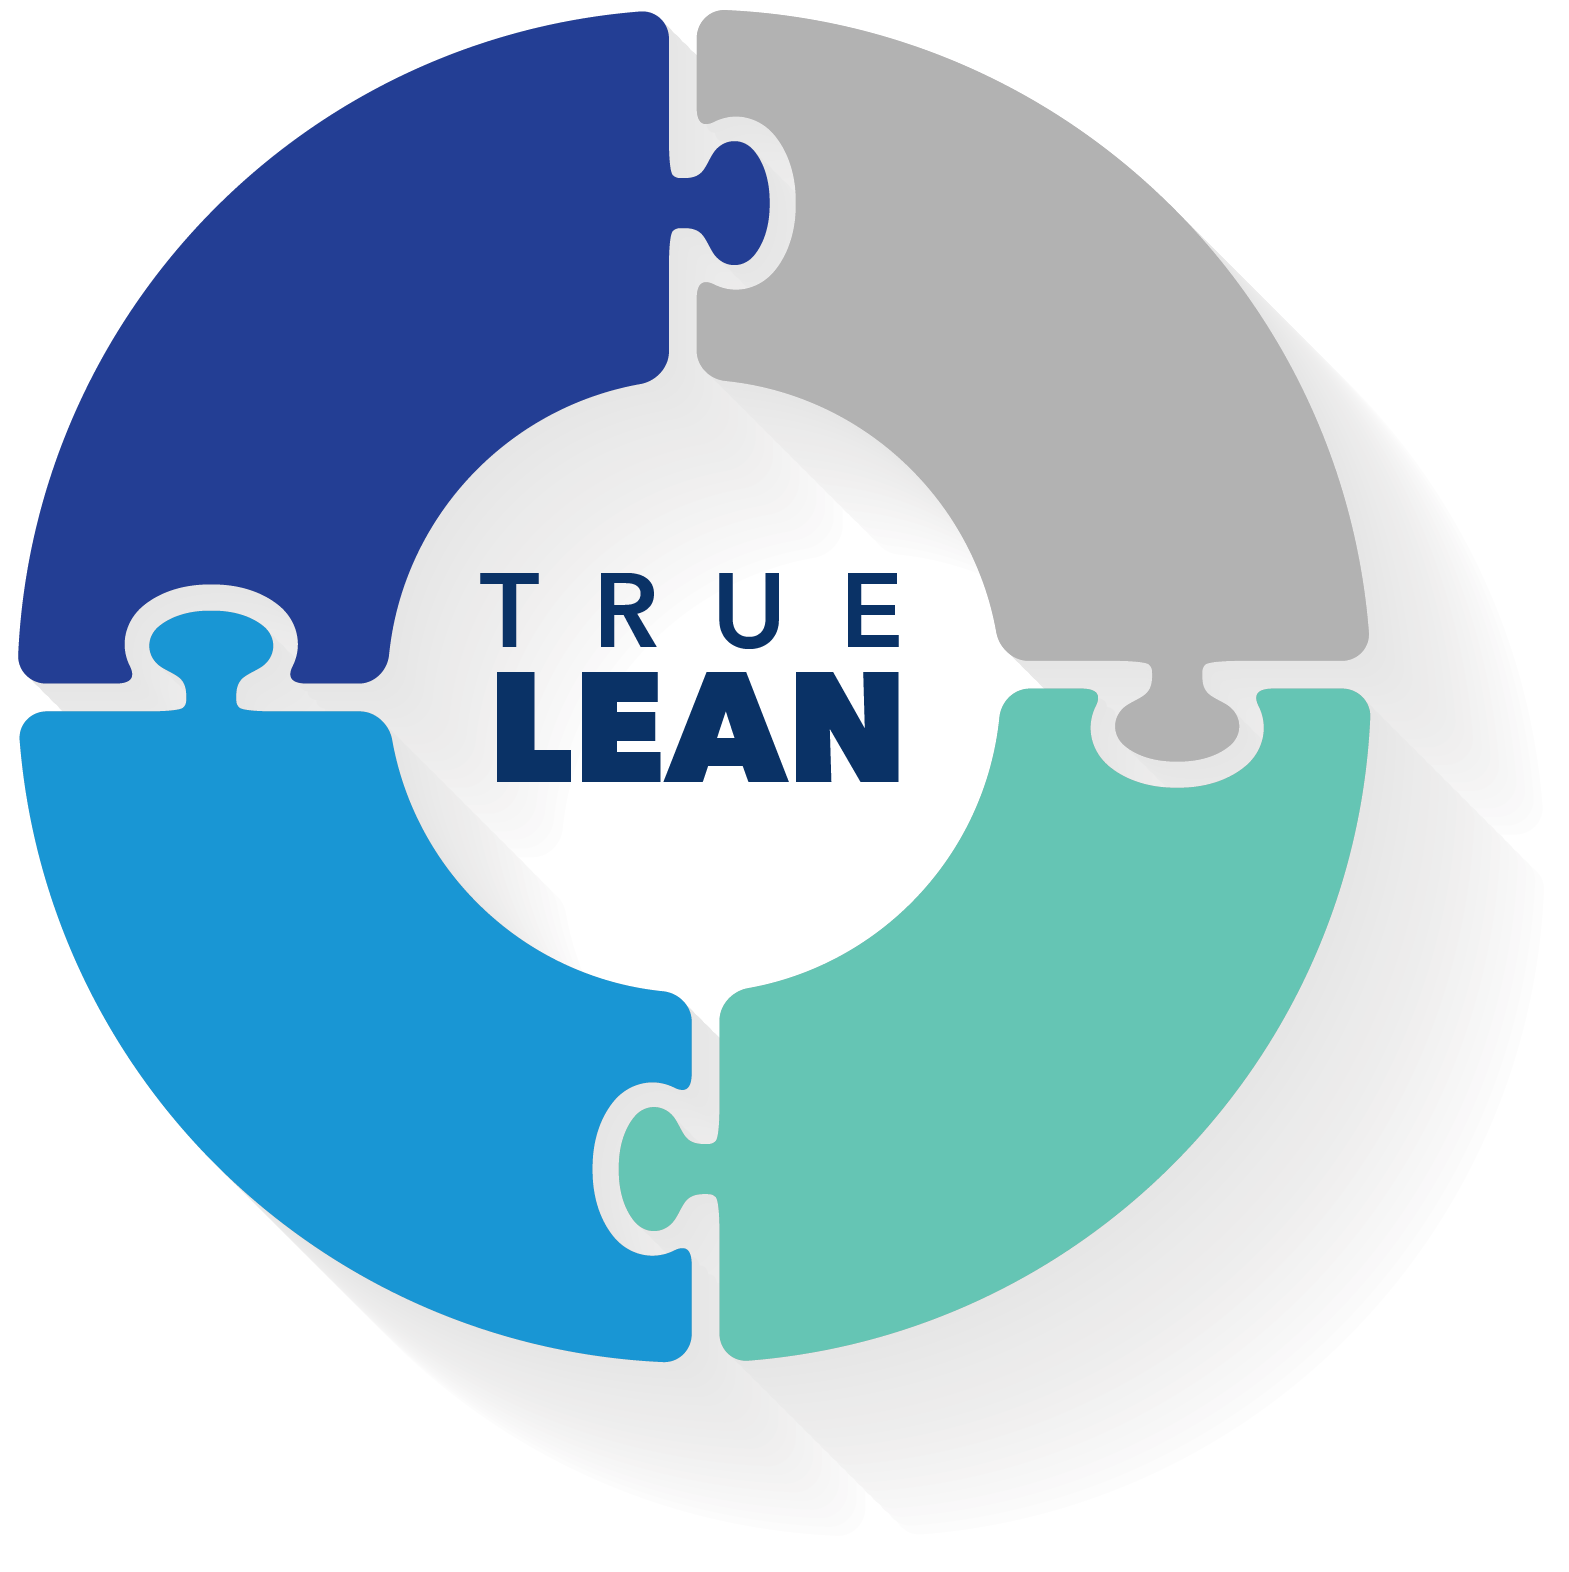 decorative image of 4 puzzle pieces in a circle with True Lean in the center